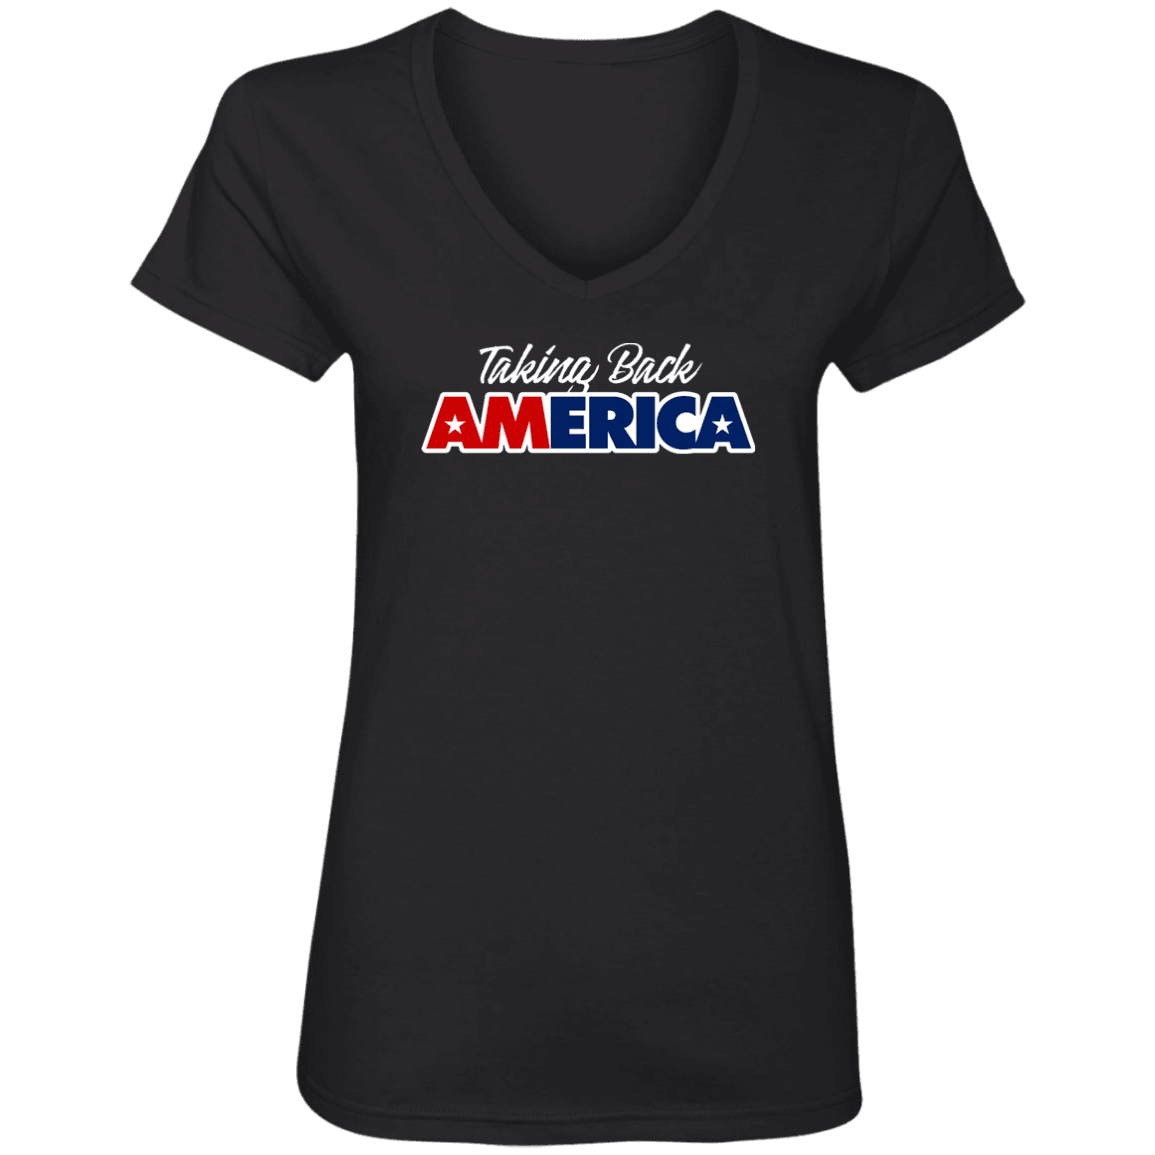 Designs by MyUtopia Shout Out:Taking Back America Ladies' V-Neck T-Shirt,Black / S,Ladies T-Shirts